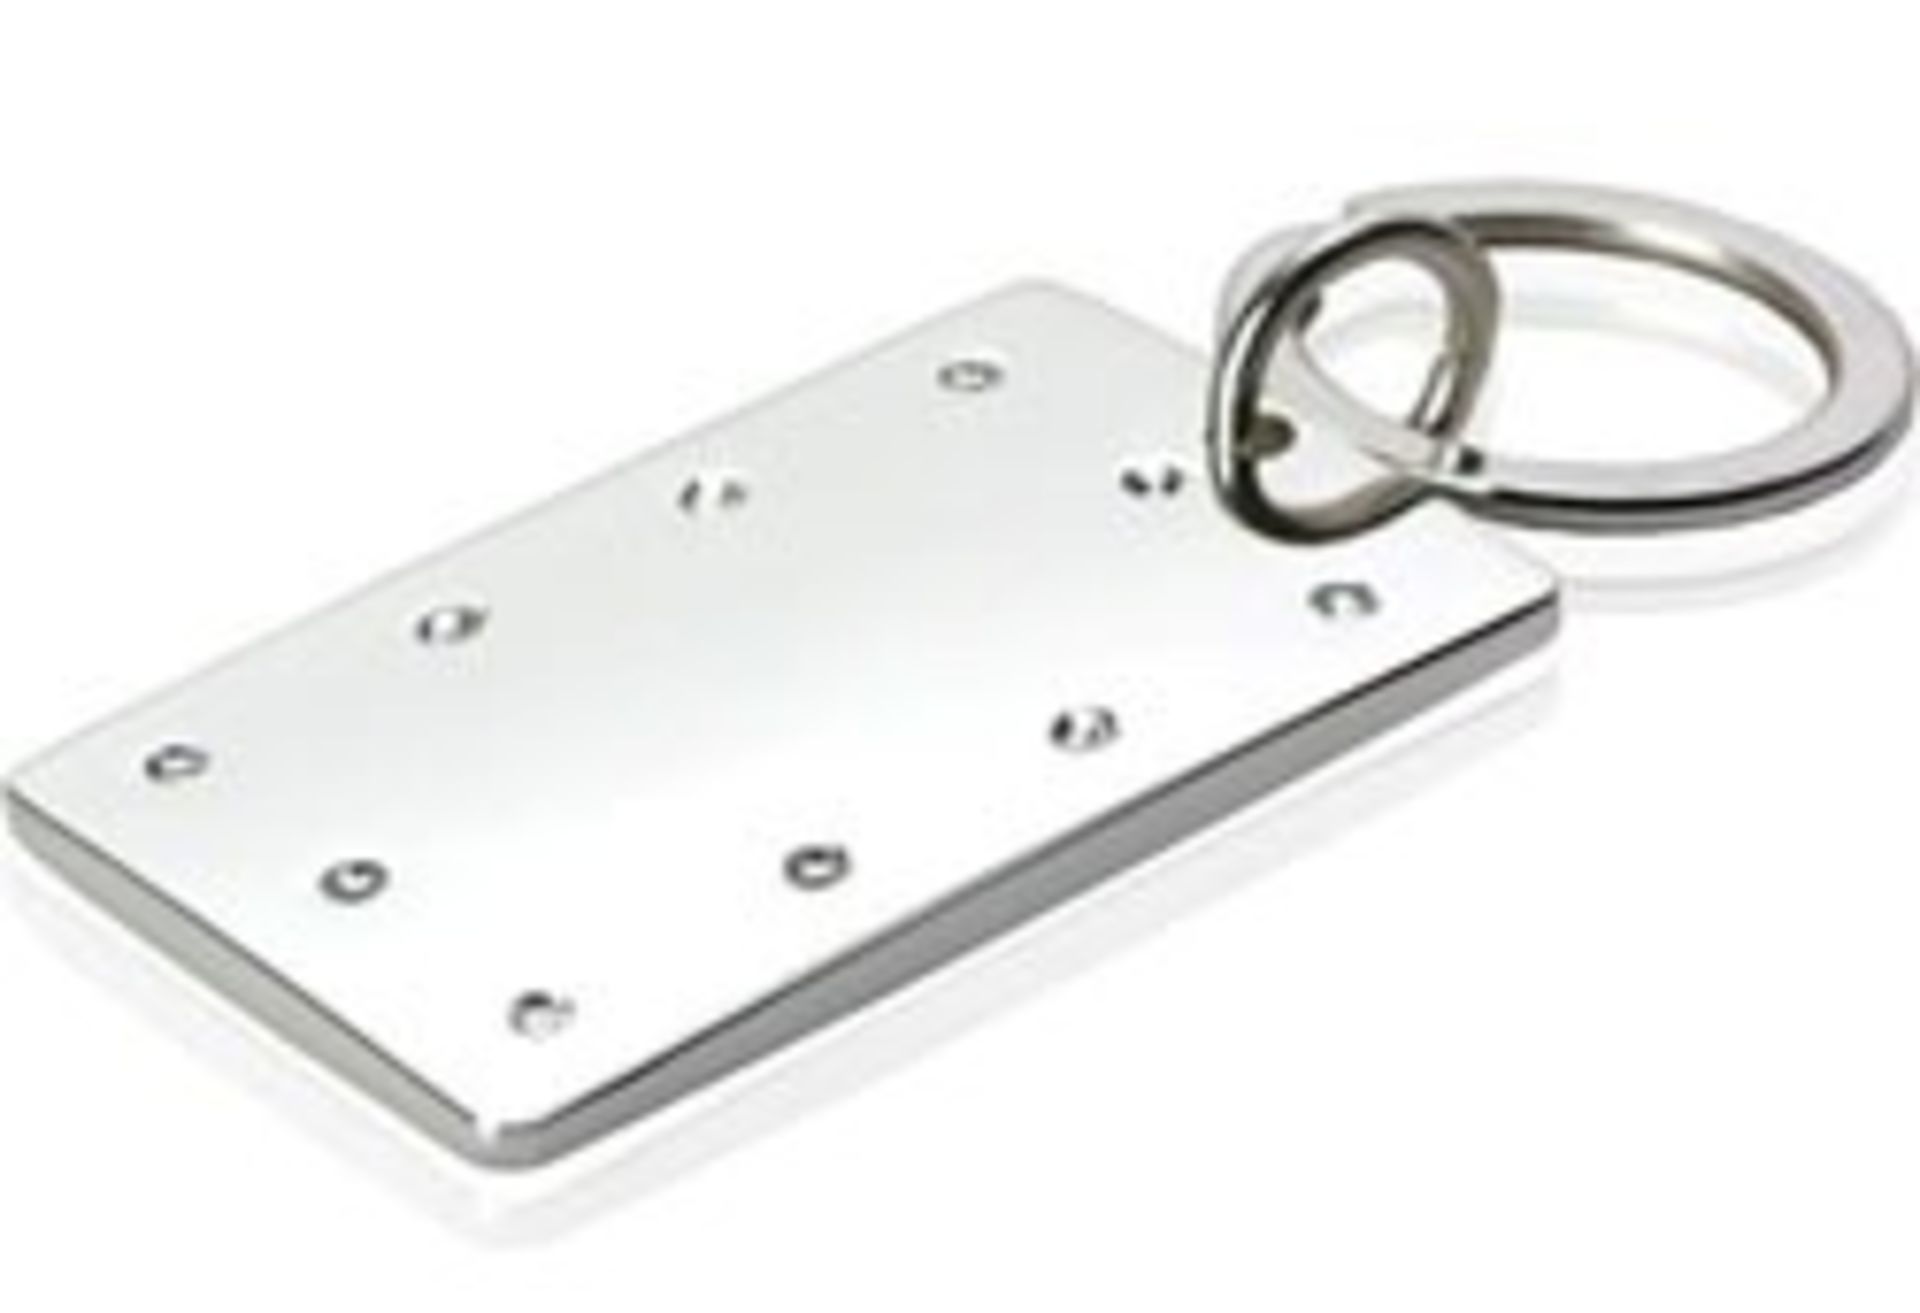 50 x Silver Plated Rectangular Key Rings By ICE London - MADE WITH "SWAROVSKI¨ ELEMENTS - Luxury - Image 6 of 6